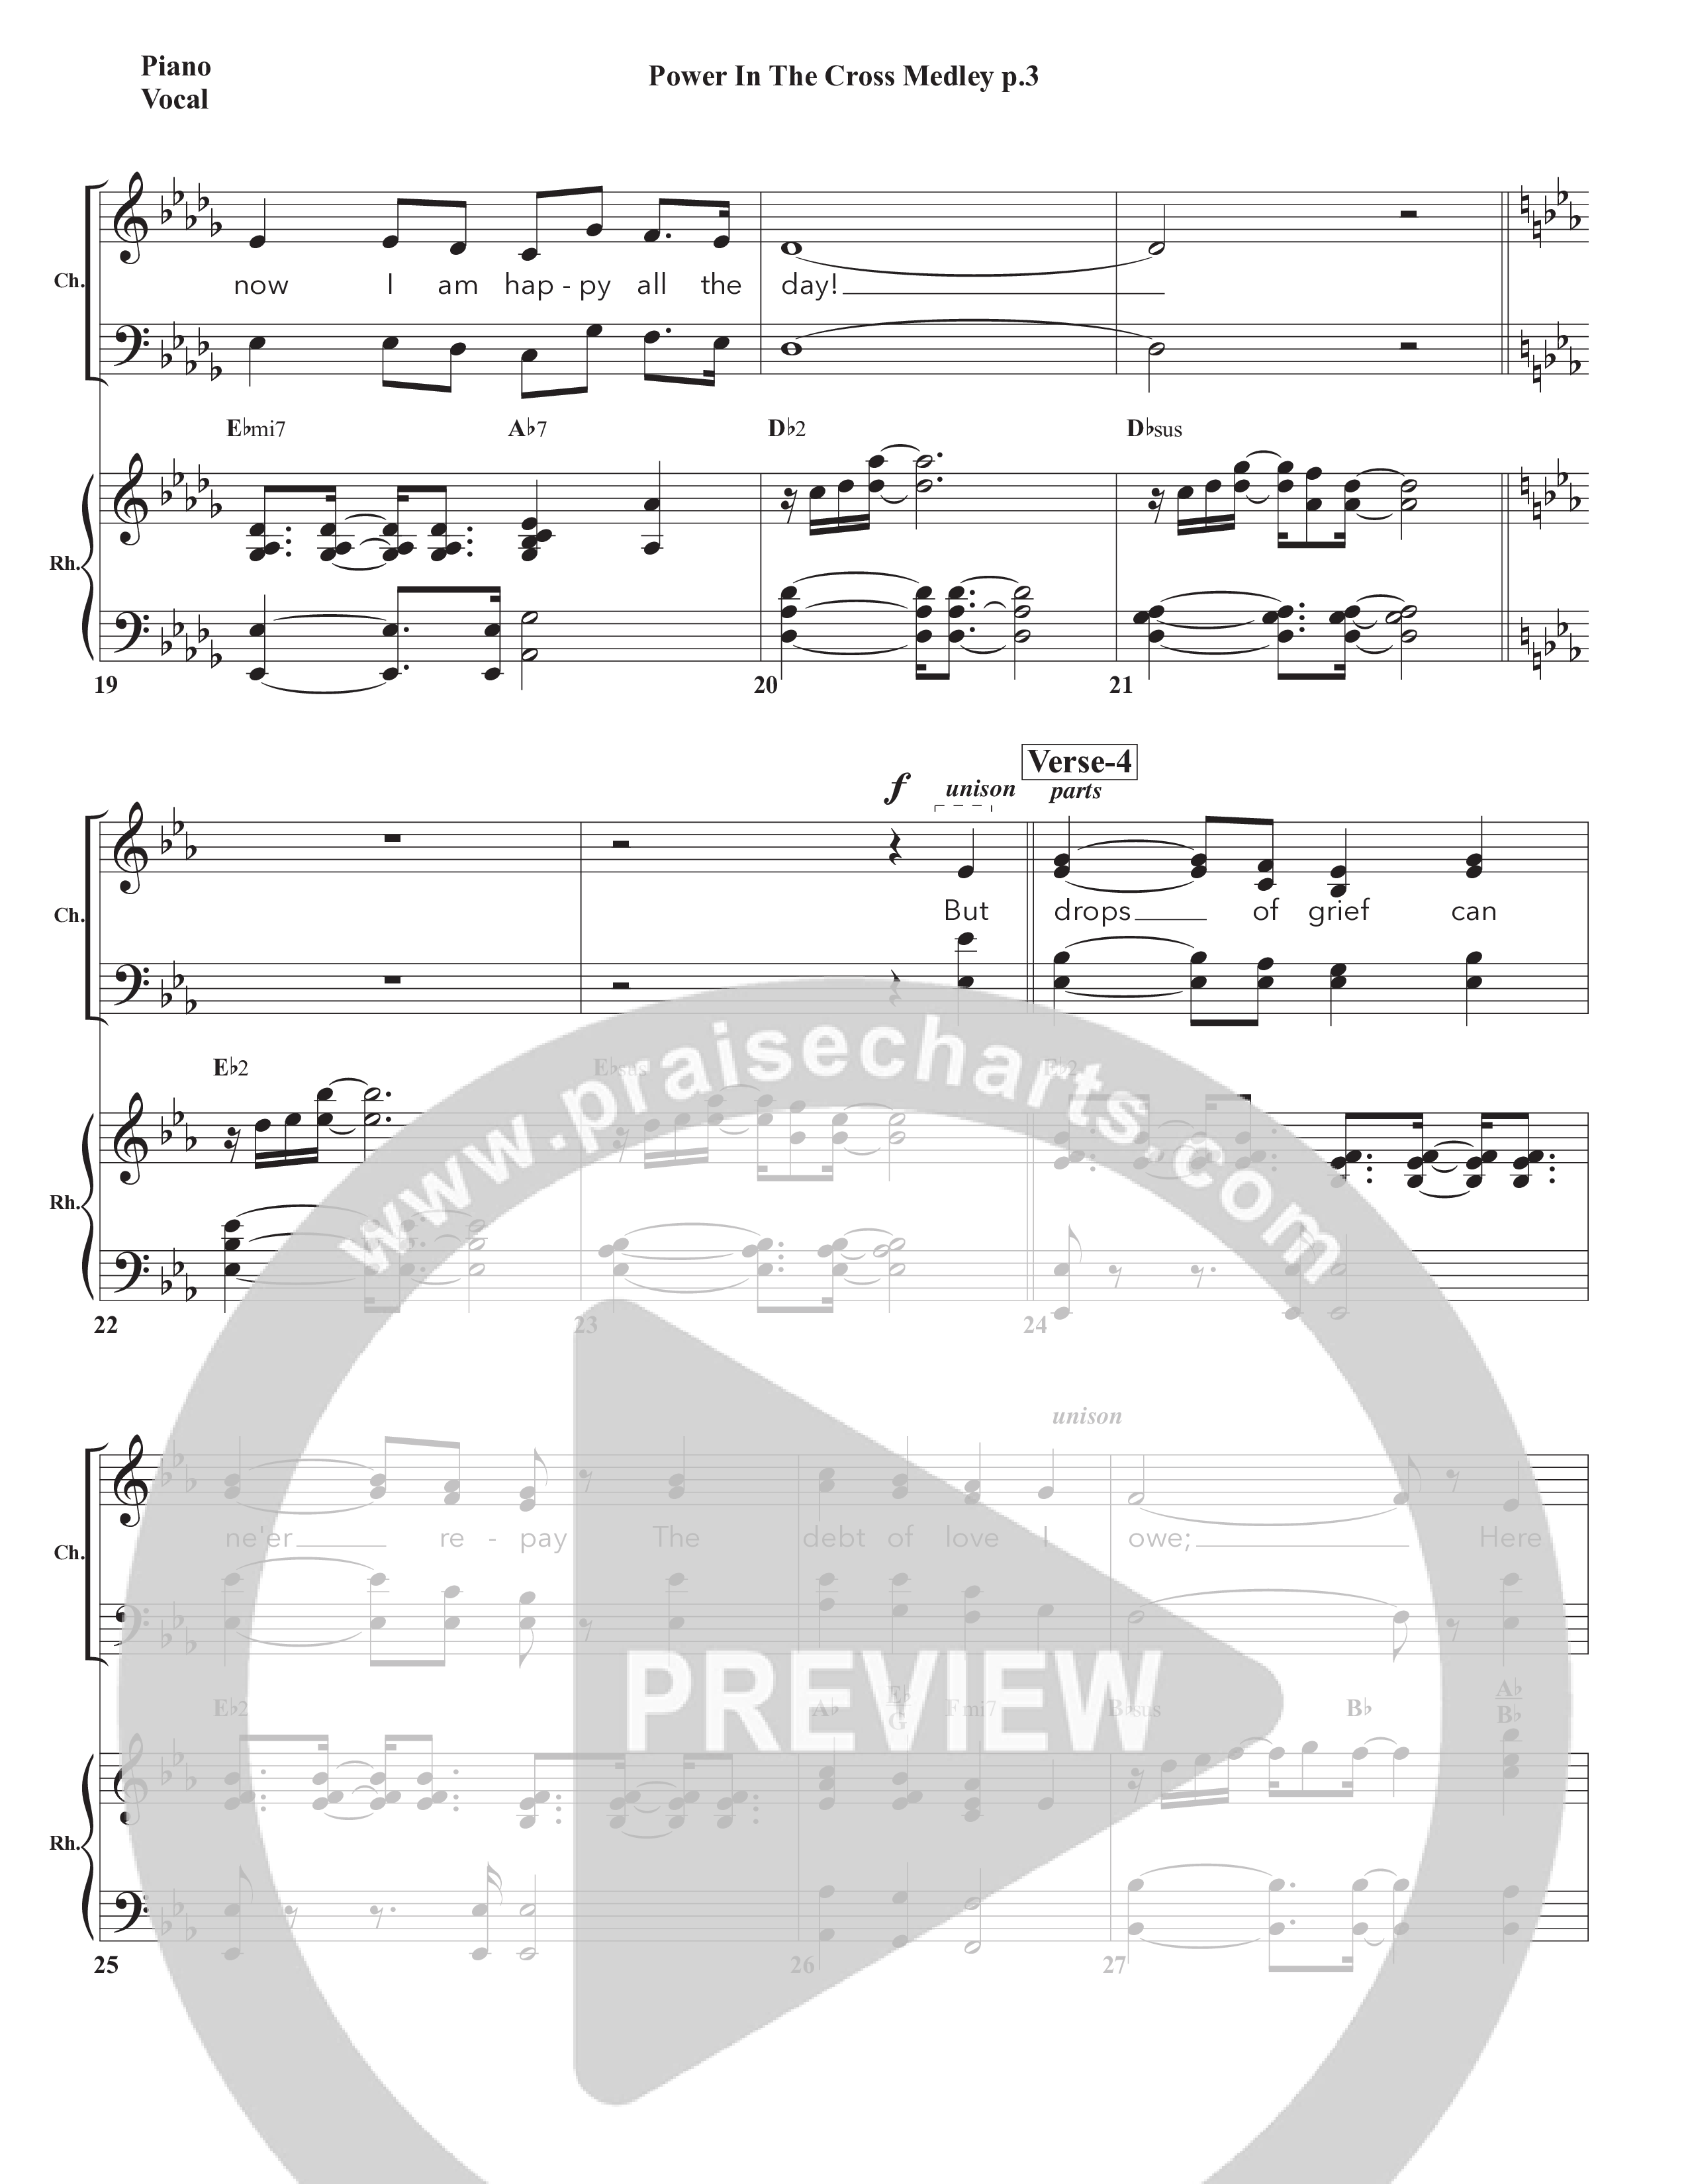 Power In The Cross Medley Piano/Vocal (SATB) (Chris Emert)